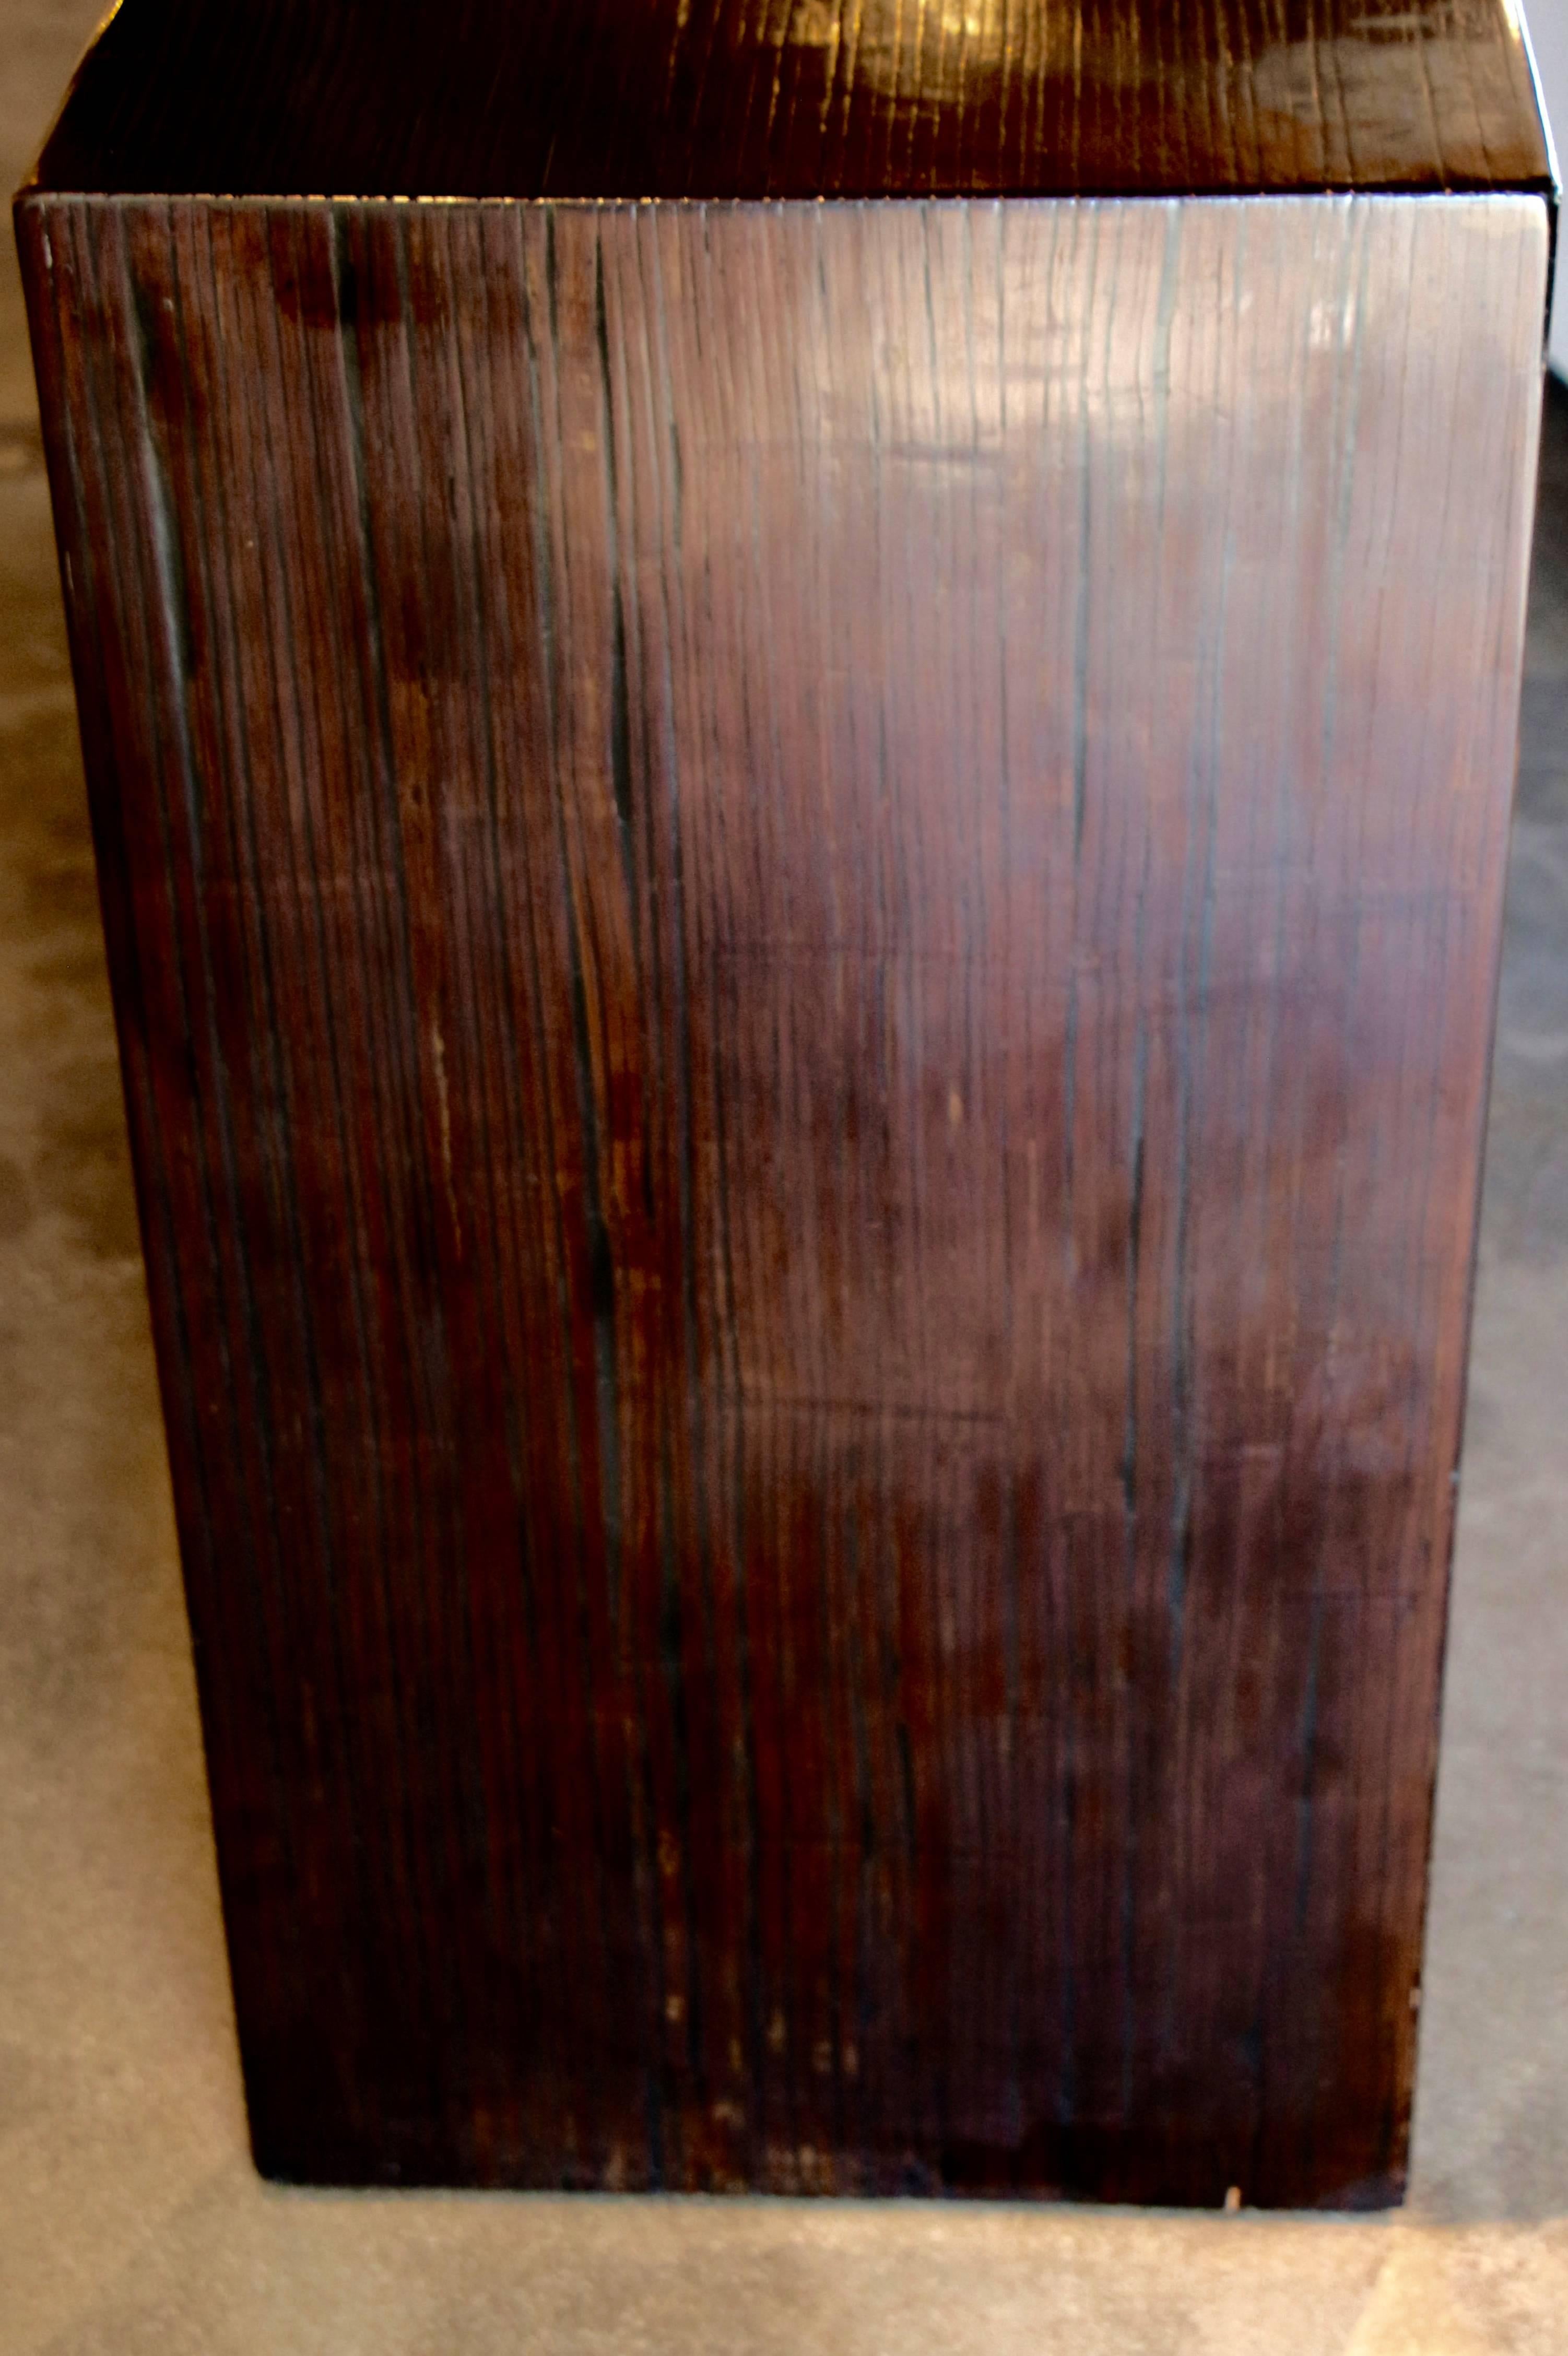 A beautifully grained brown console. I'm not really sure what kind of wood it is, it is possible bamboo veneered and Asian, except to say how lovely the grain is.